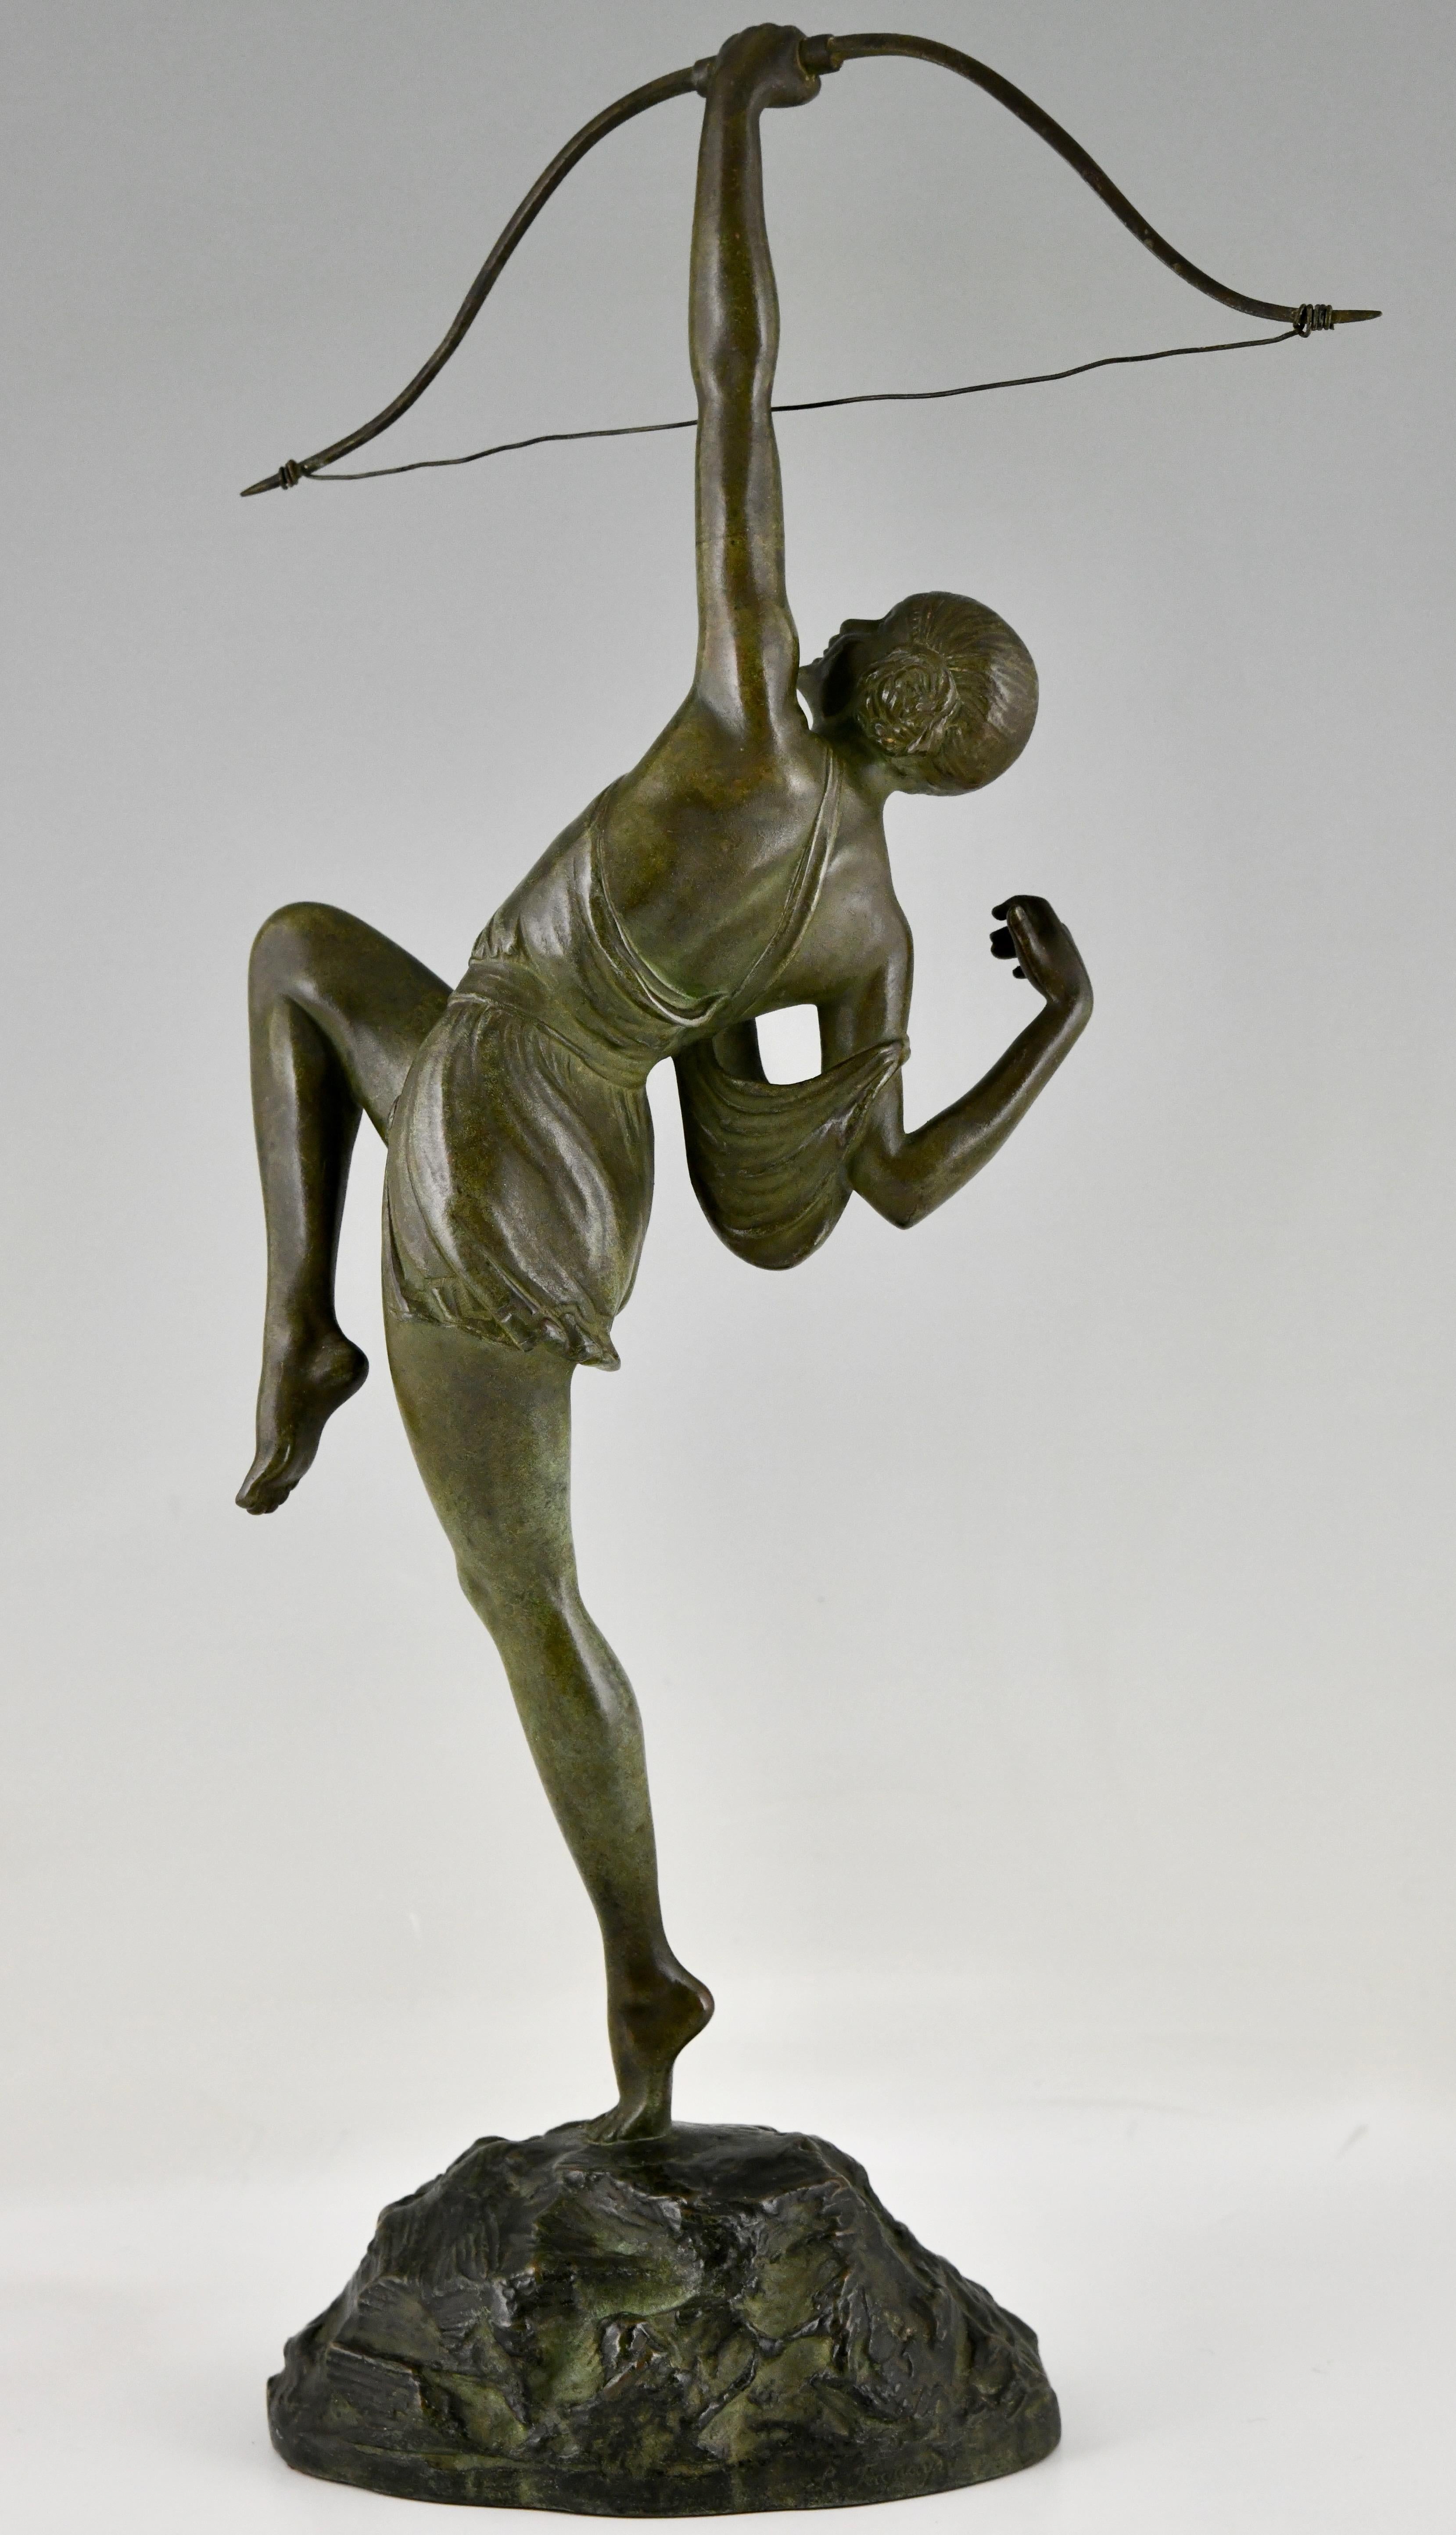 Mid-20th Century Art Deco Bronze Sculpture Diana Woman with Bow by Pierre Le Faguays 1925